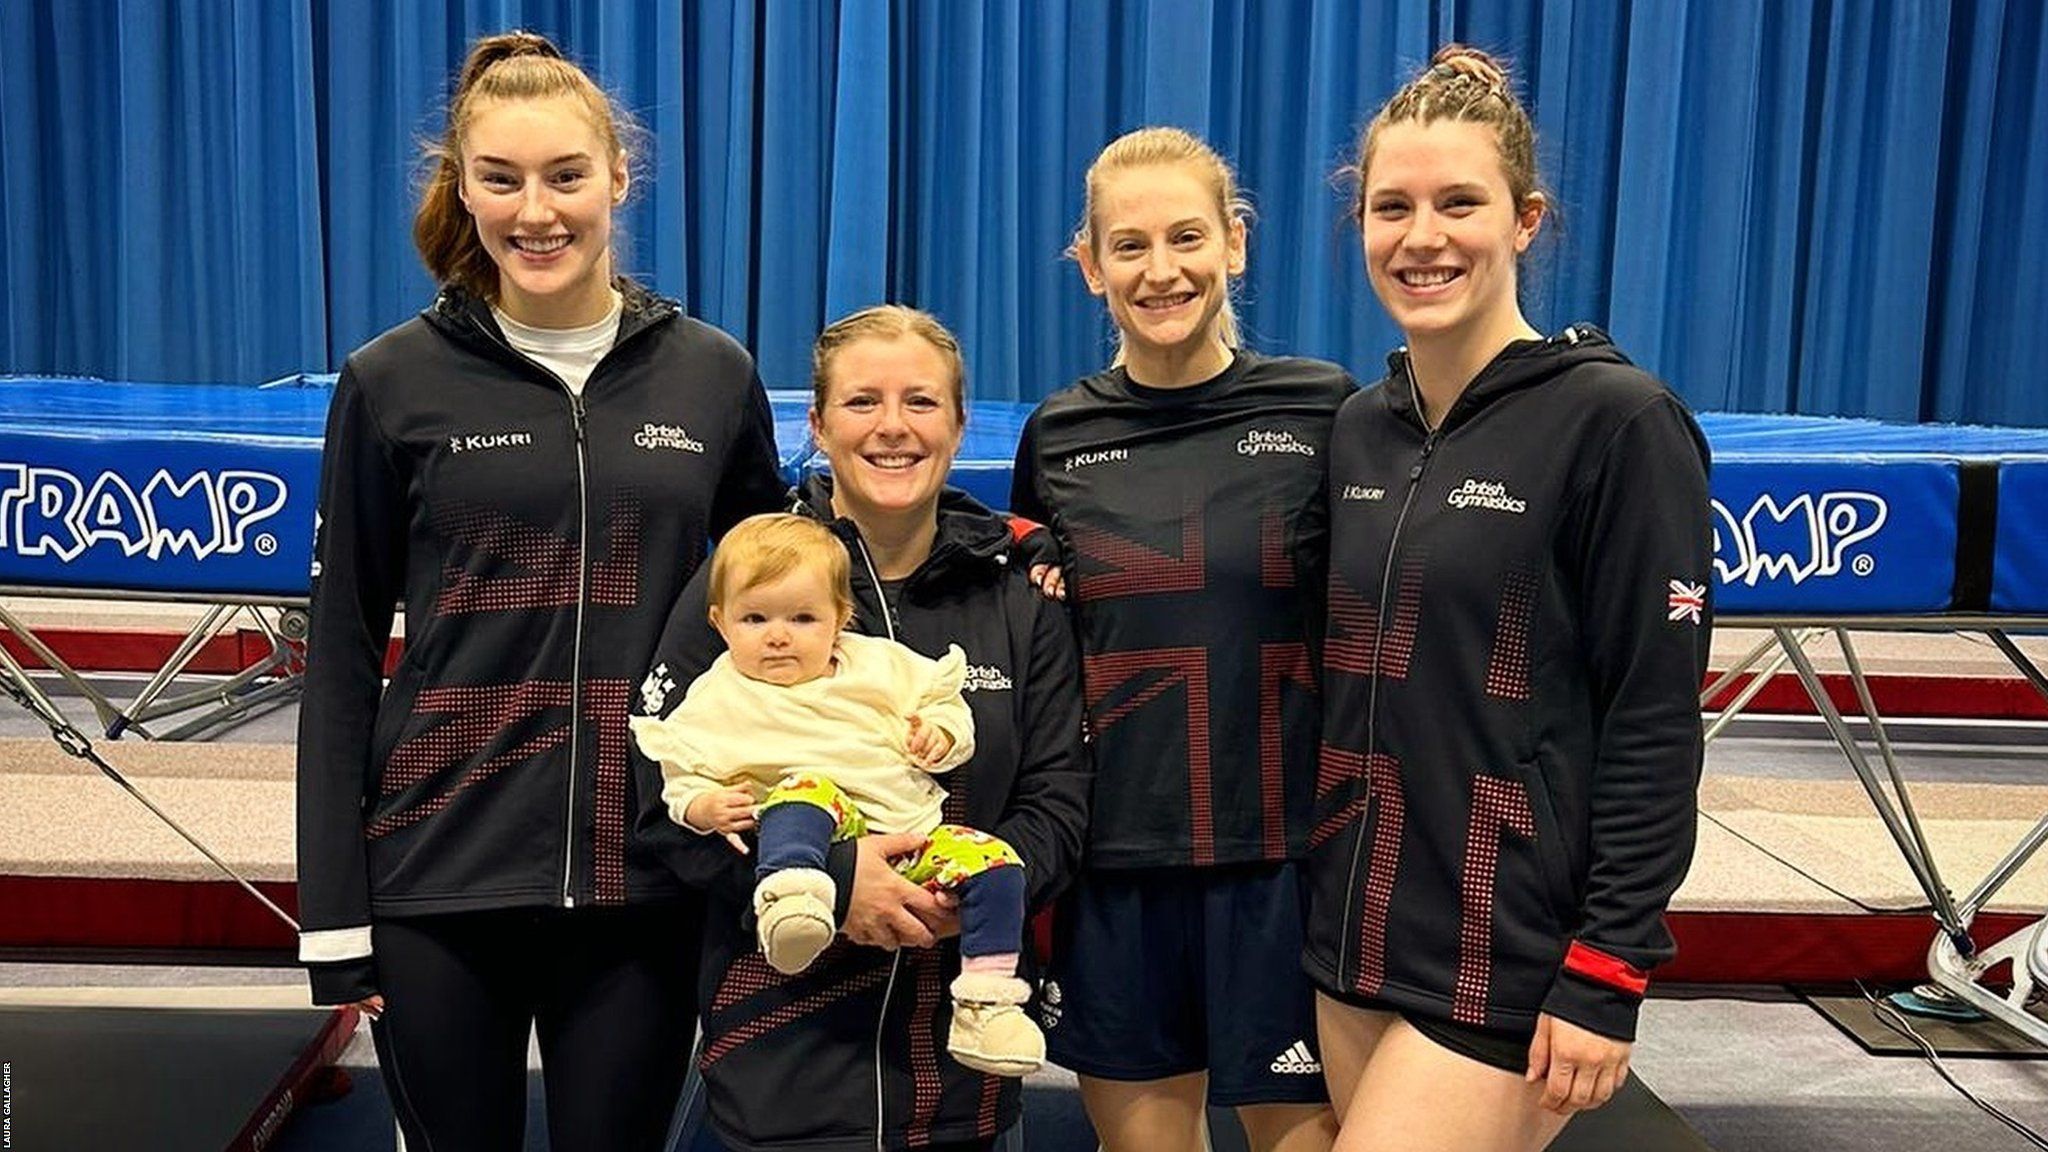 Laura introduces her daughter Edie to her GB team mates